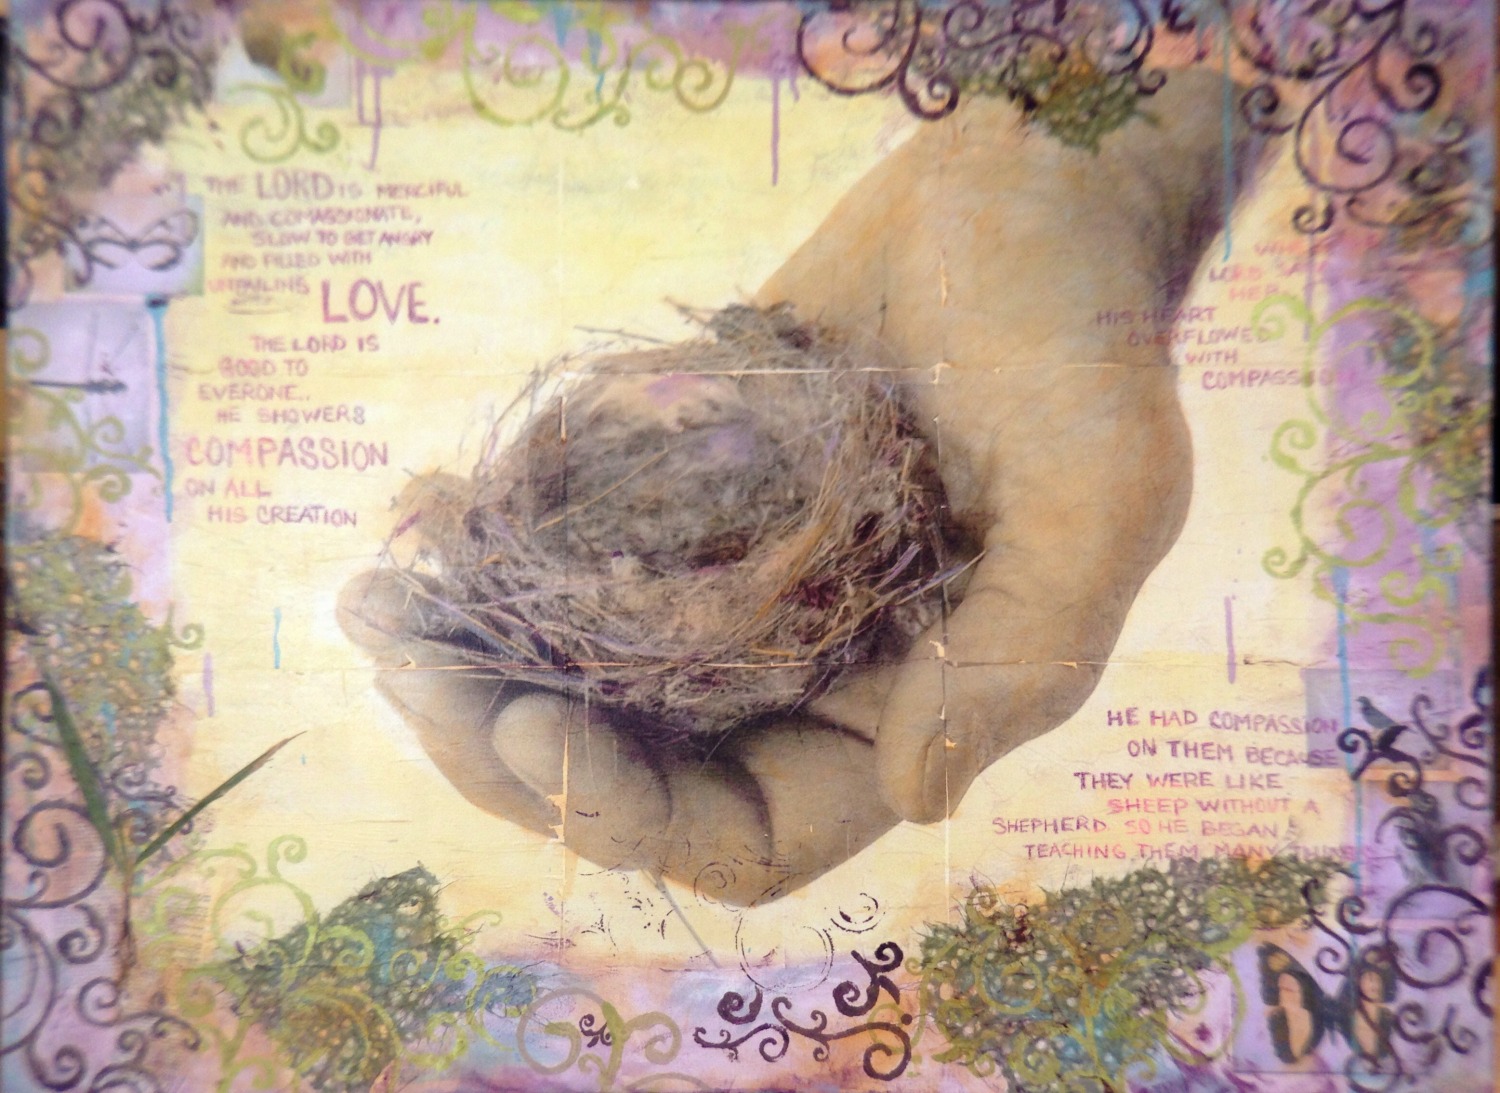 Compassion - photo transfers and mixed media on canvas by Judith Monroe